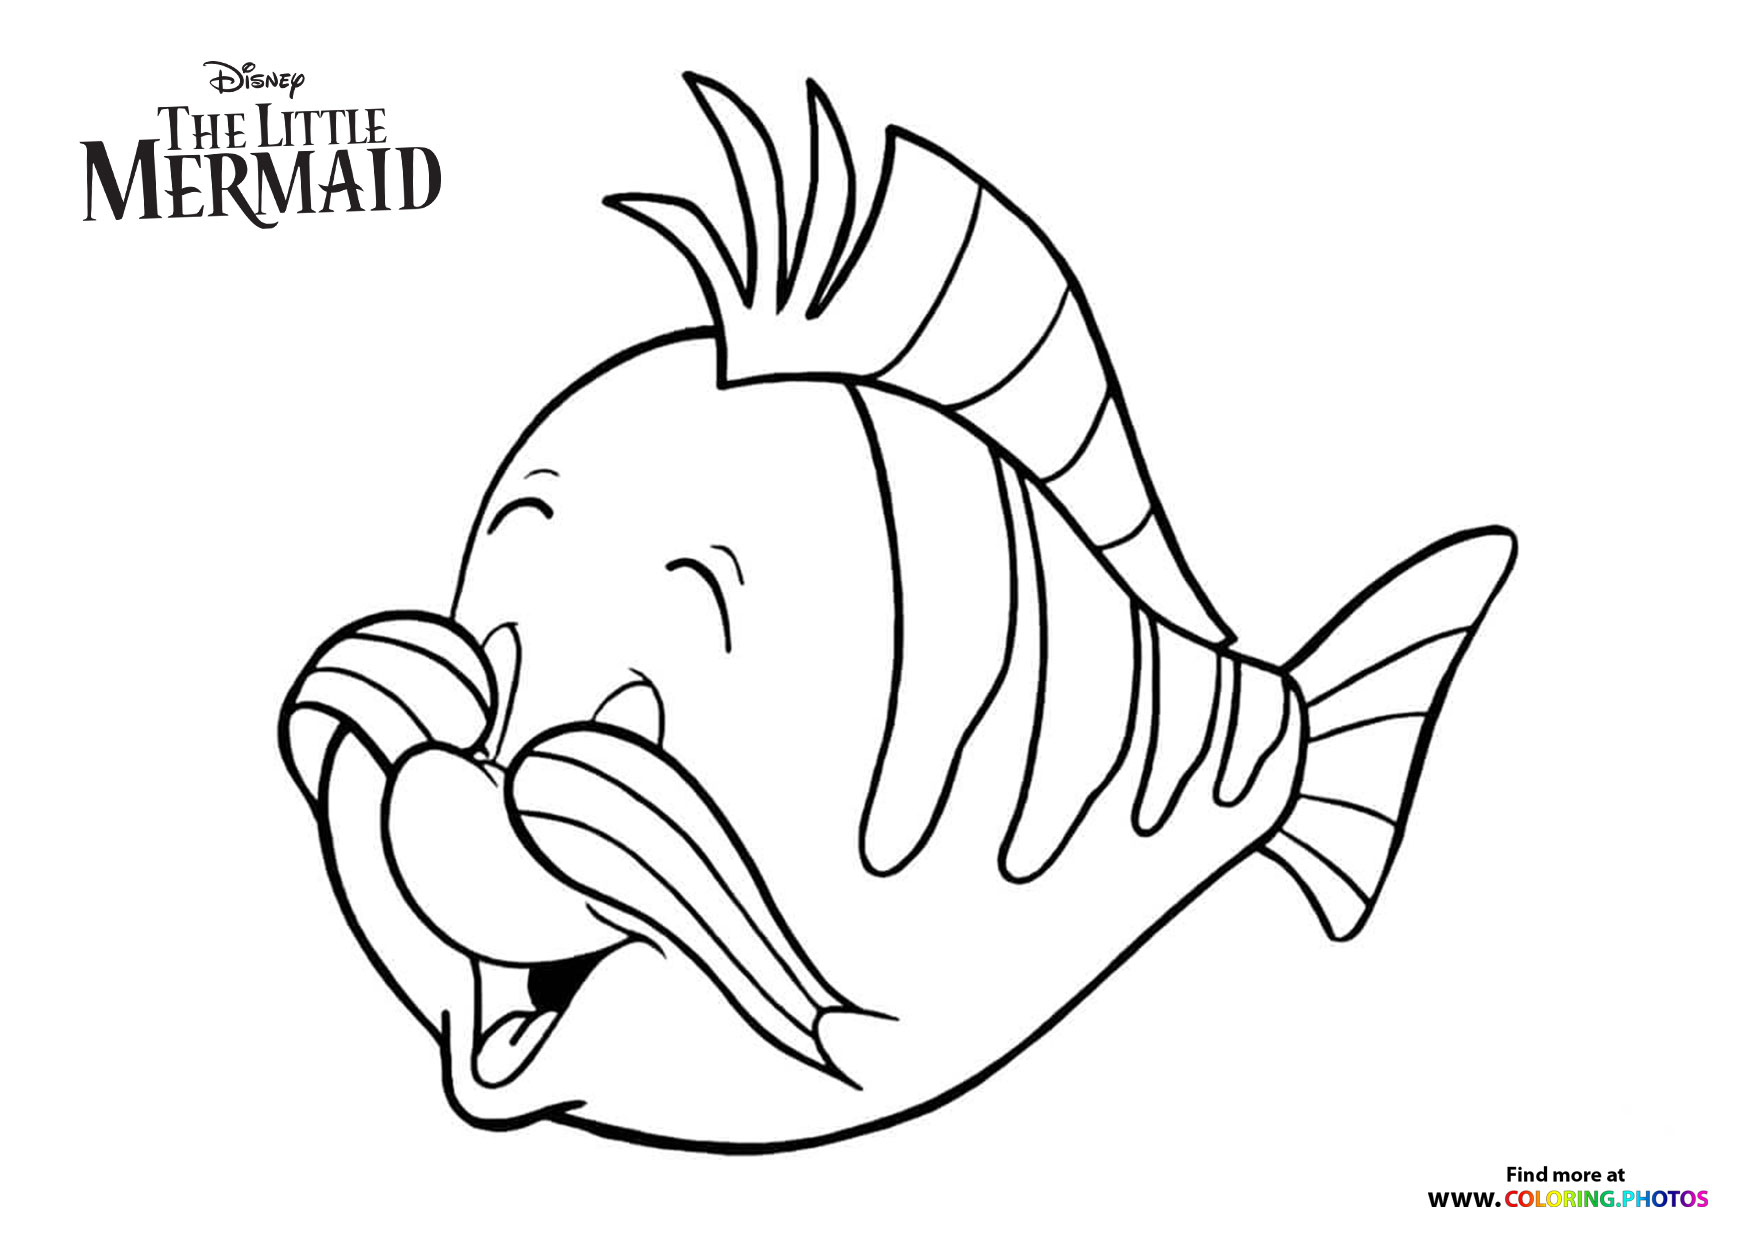 ariel and flounder the little mermaid coloring pages